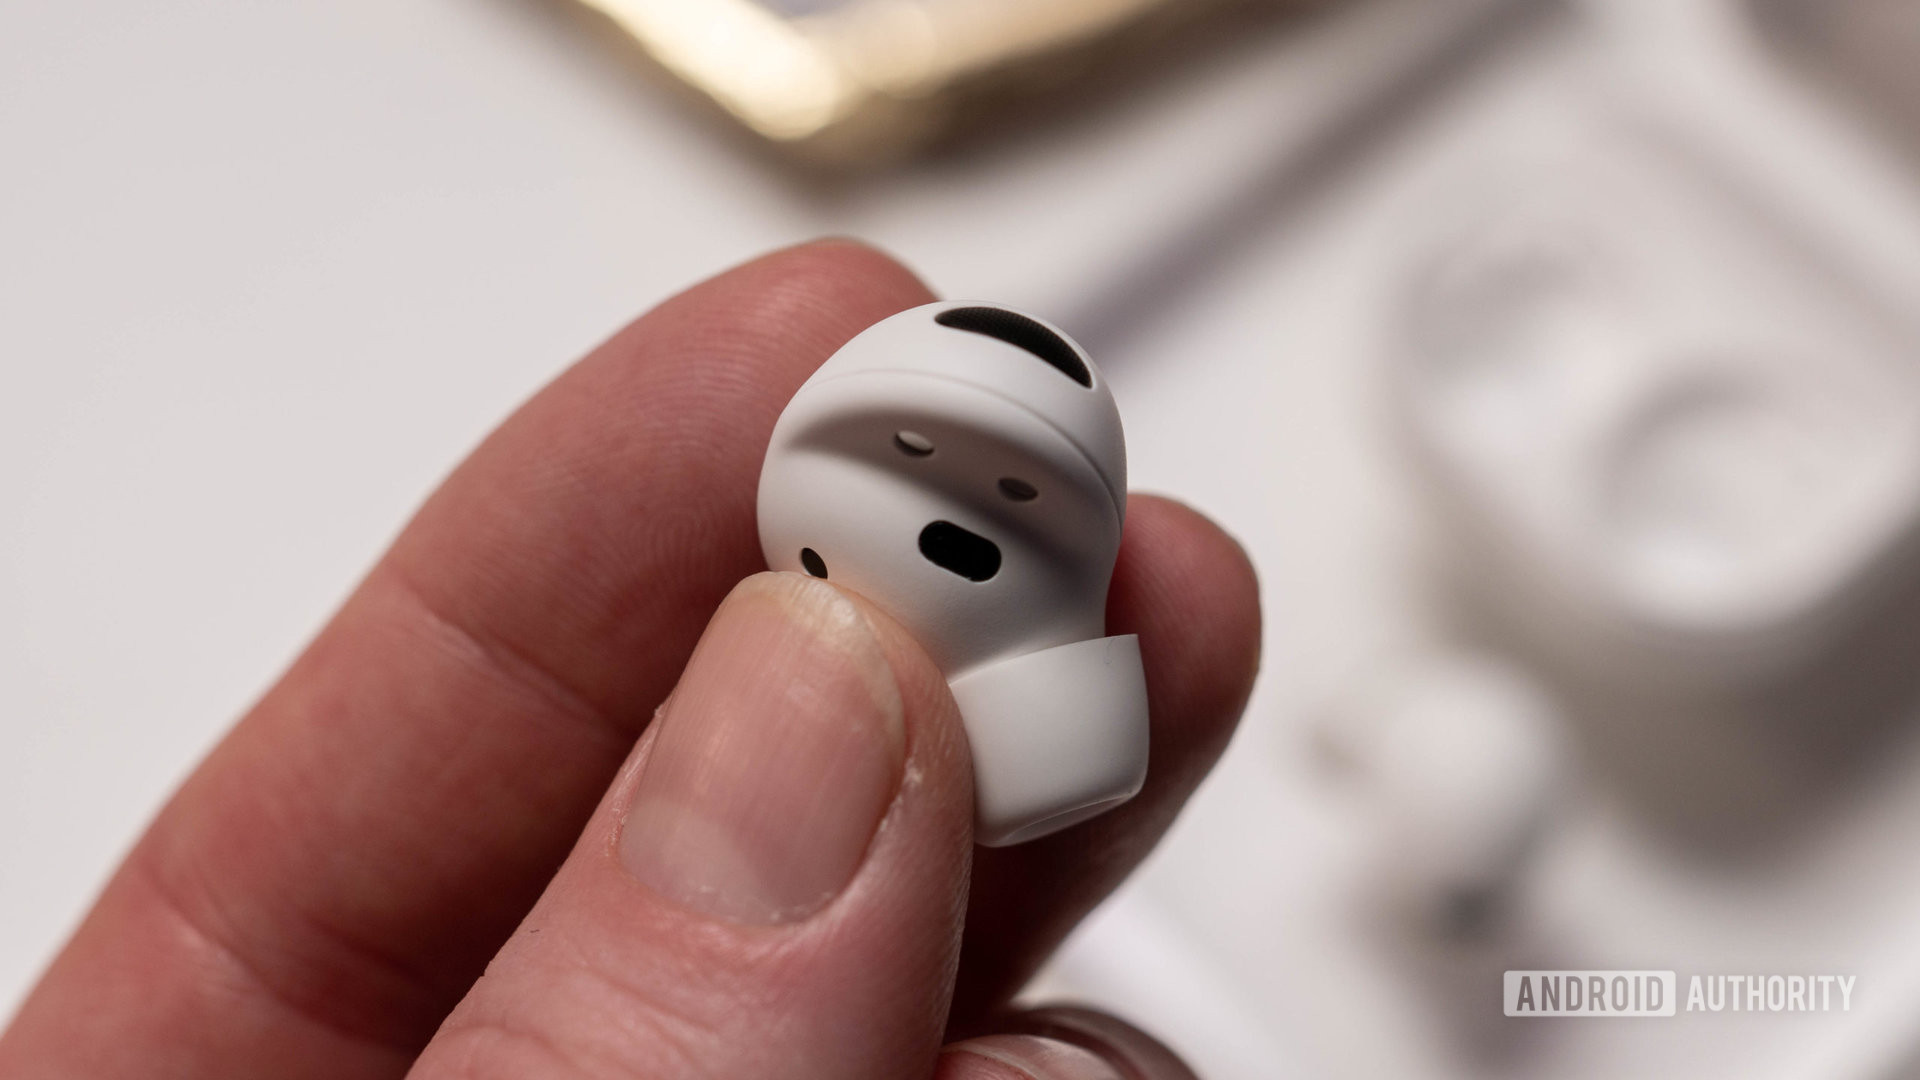 Samsung Galaxy Buds 2 Pro in white color in hand